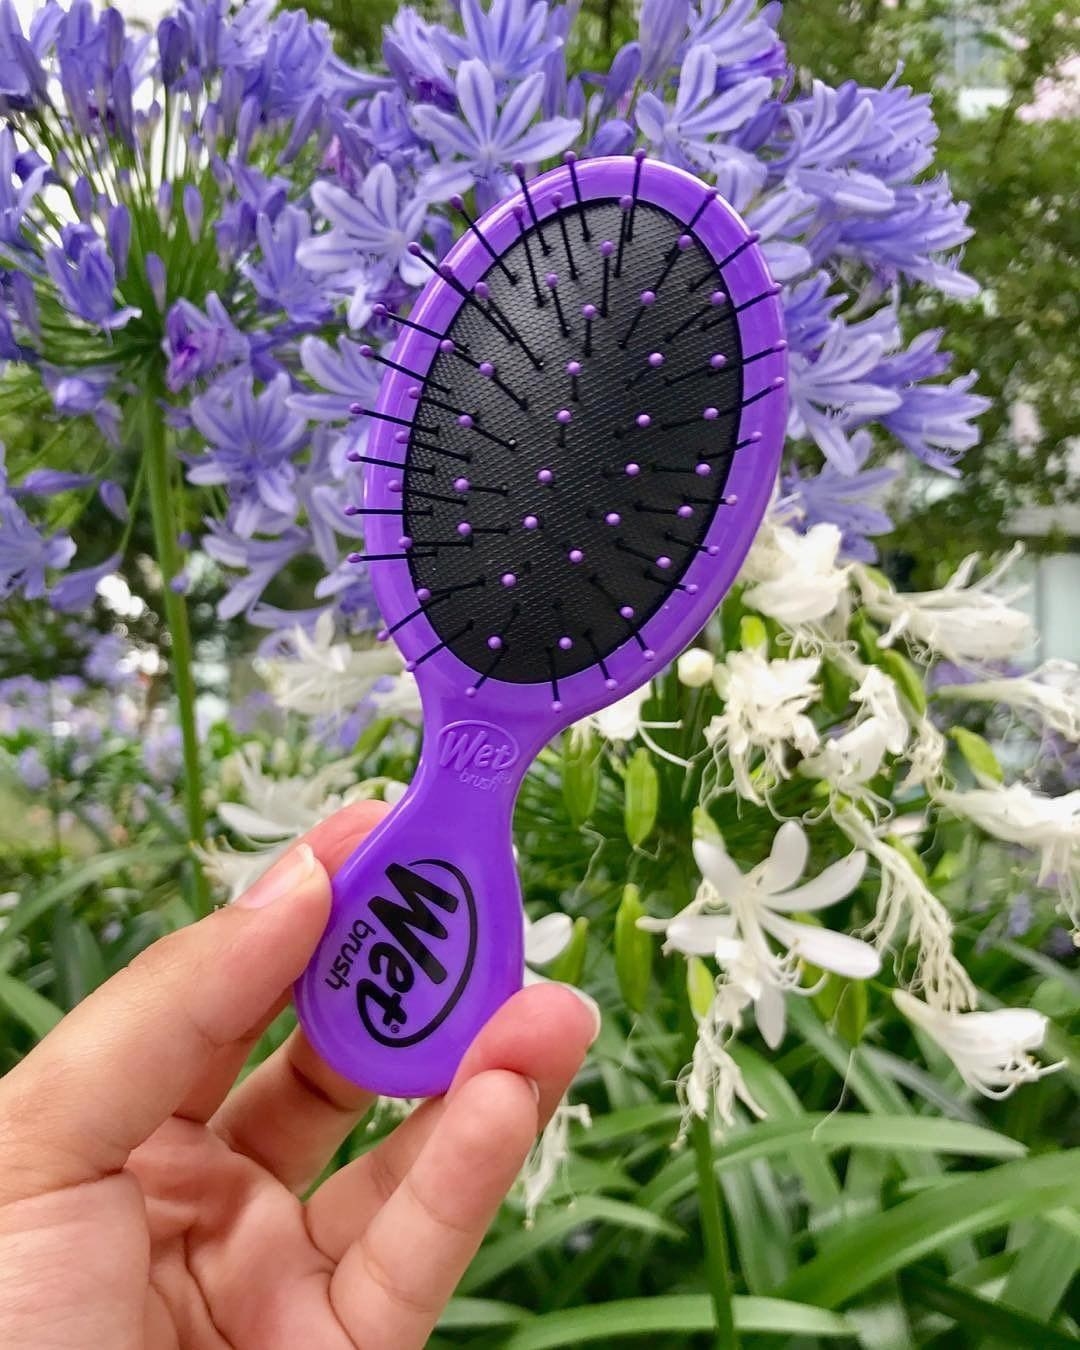 A person holding the wetbrush